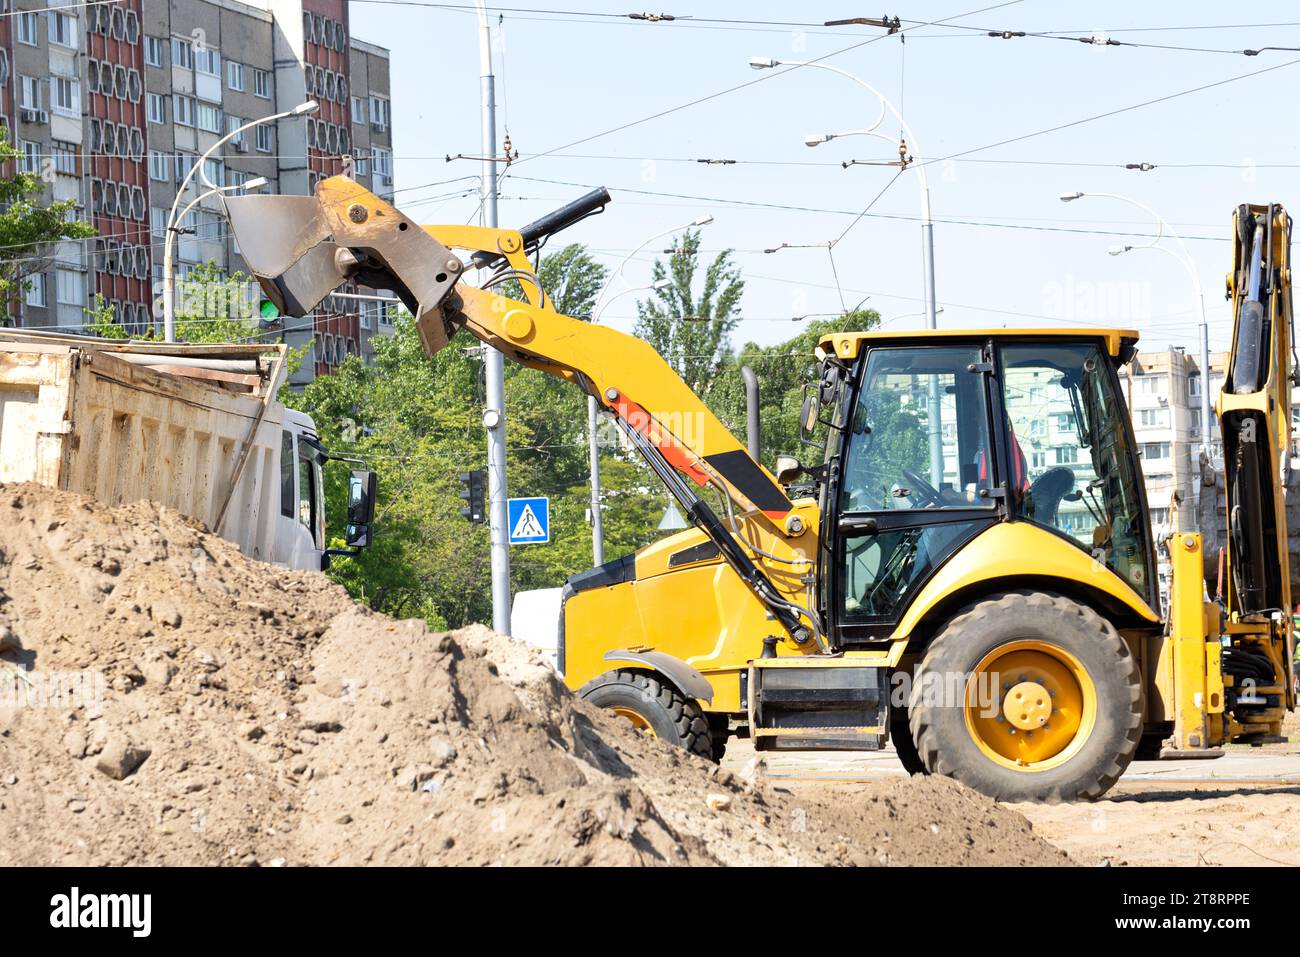 The sliding bucket of a road excavator works to load sand into the back of a truck against the backdrop of a city street on a summer day. Stock Photo